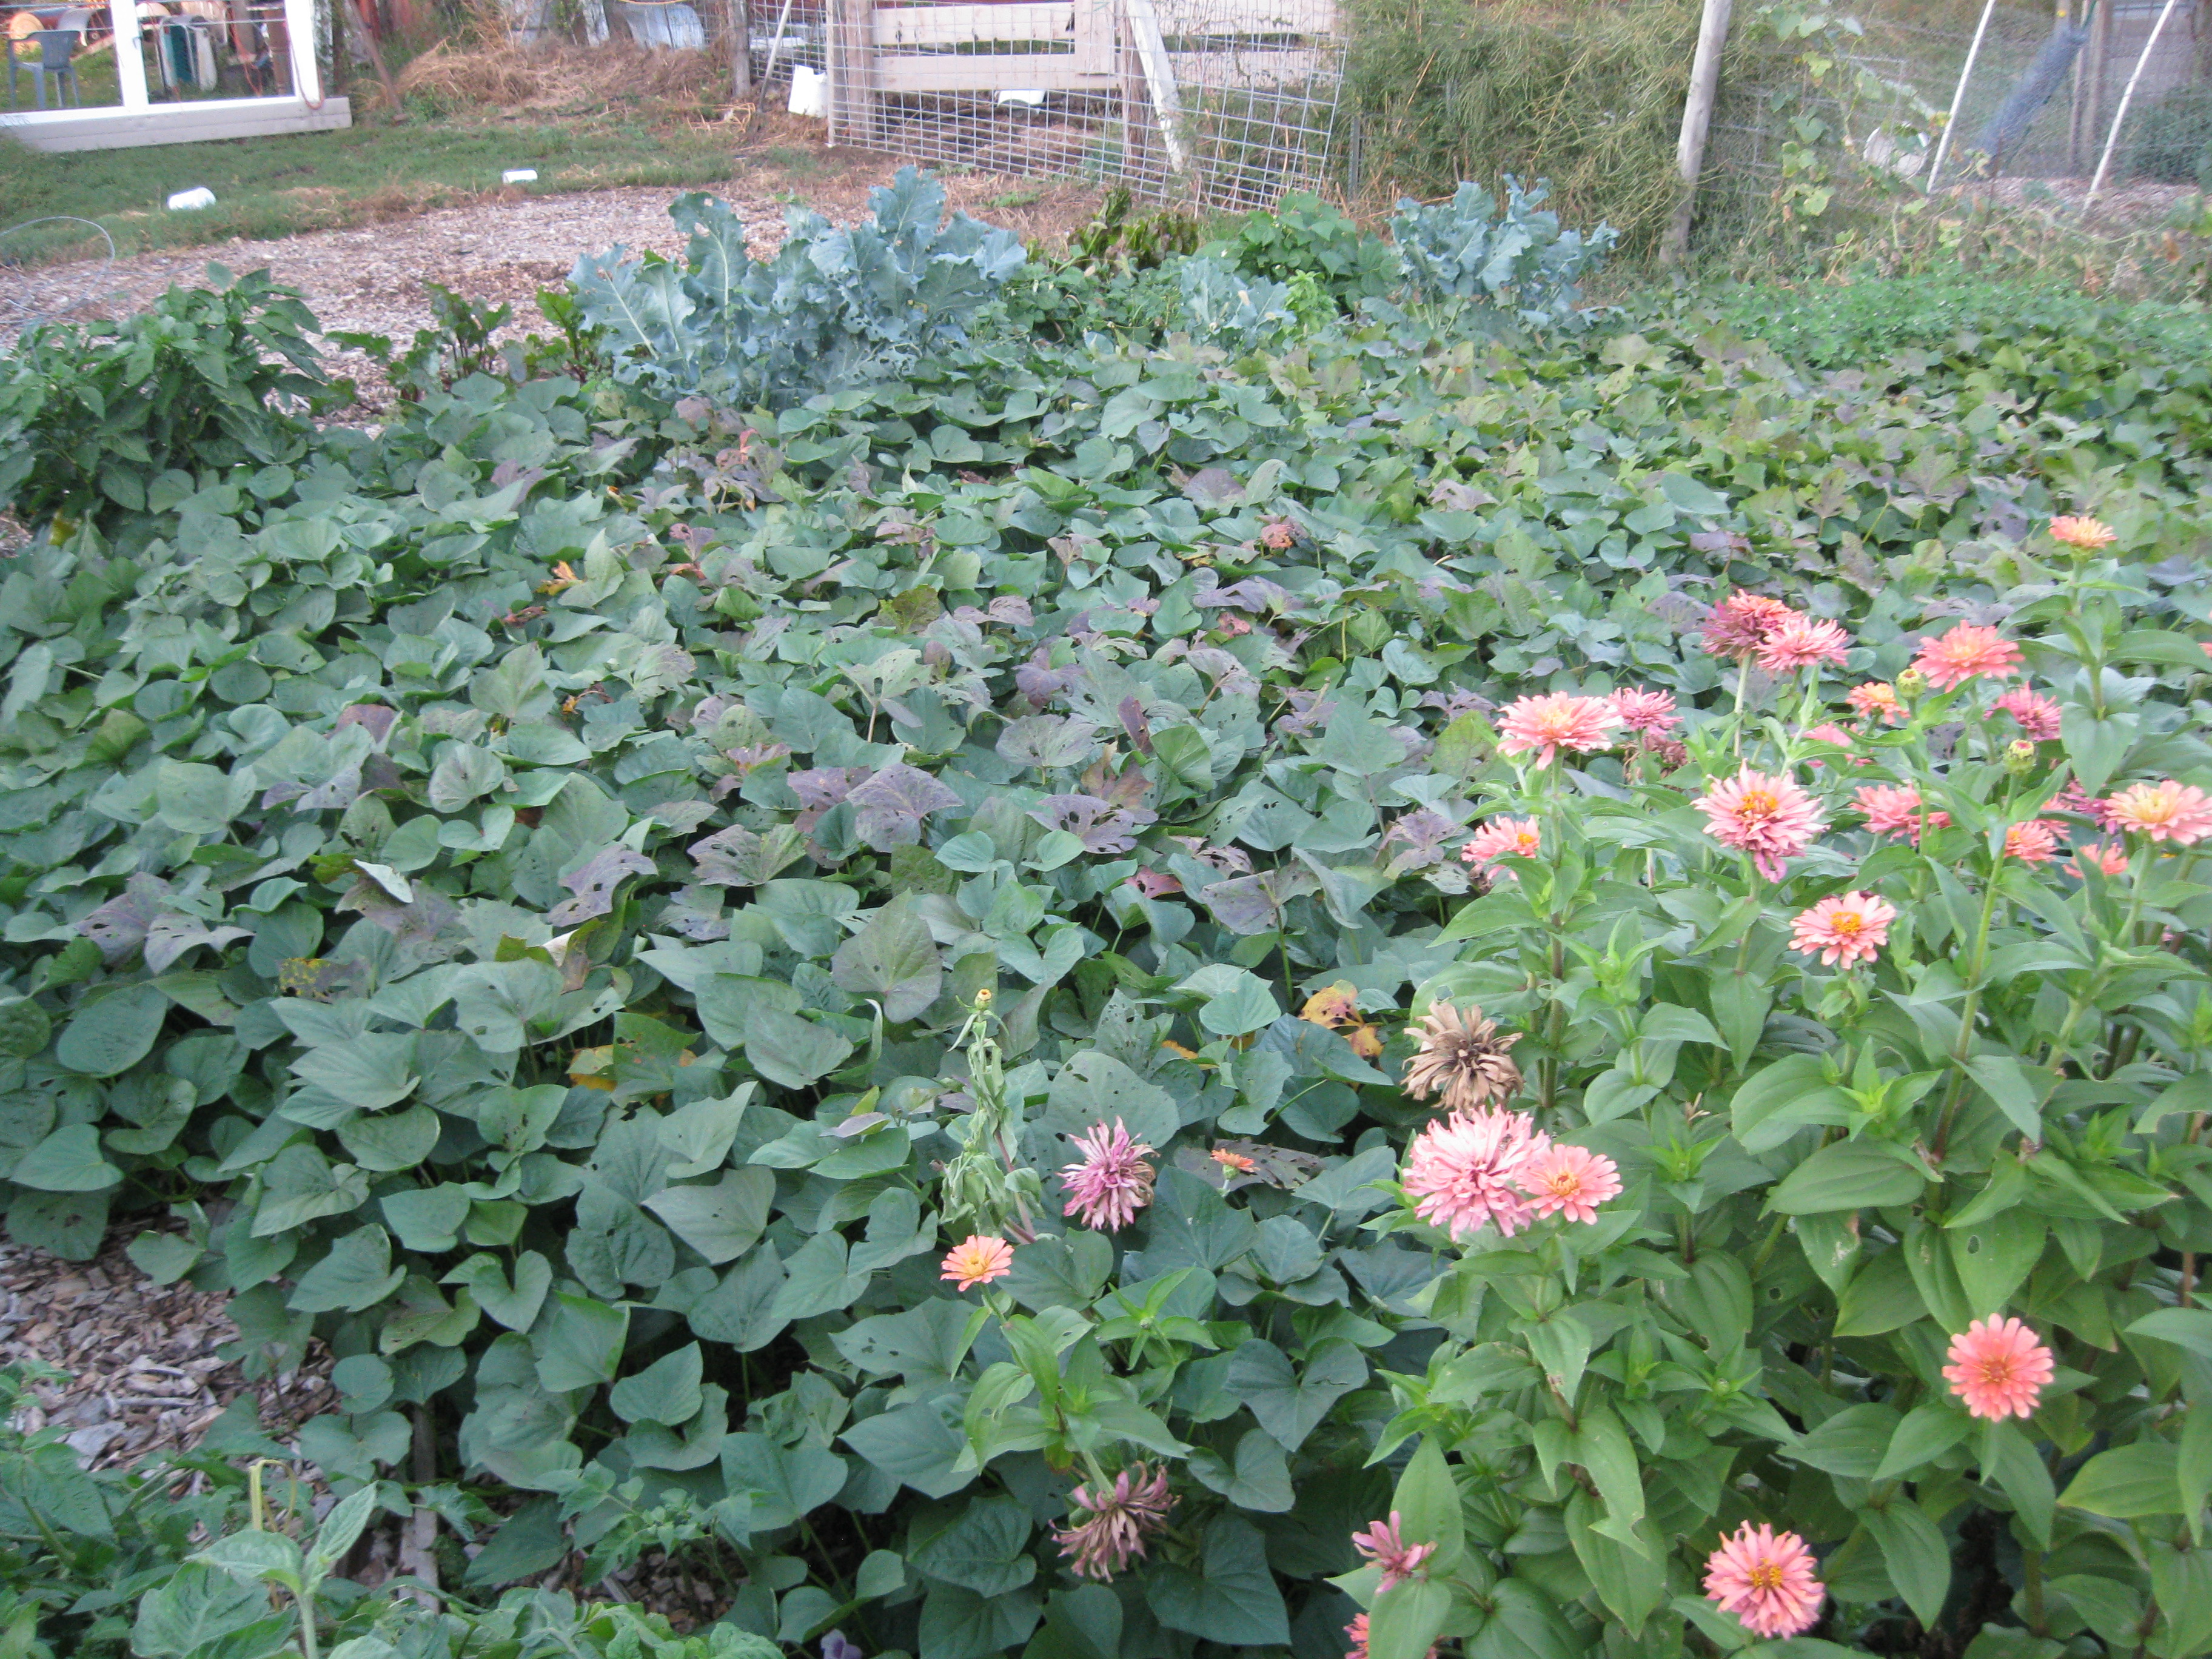 Return to Anne’s “Back to Eden” garden: oh, the sweet potatoes!